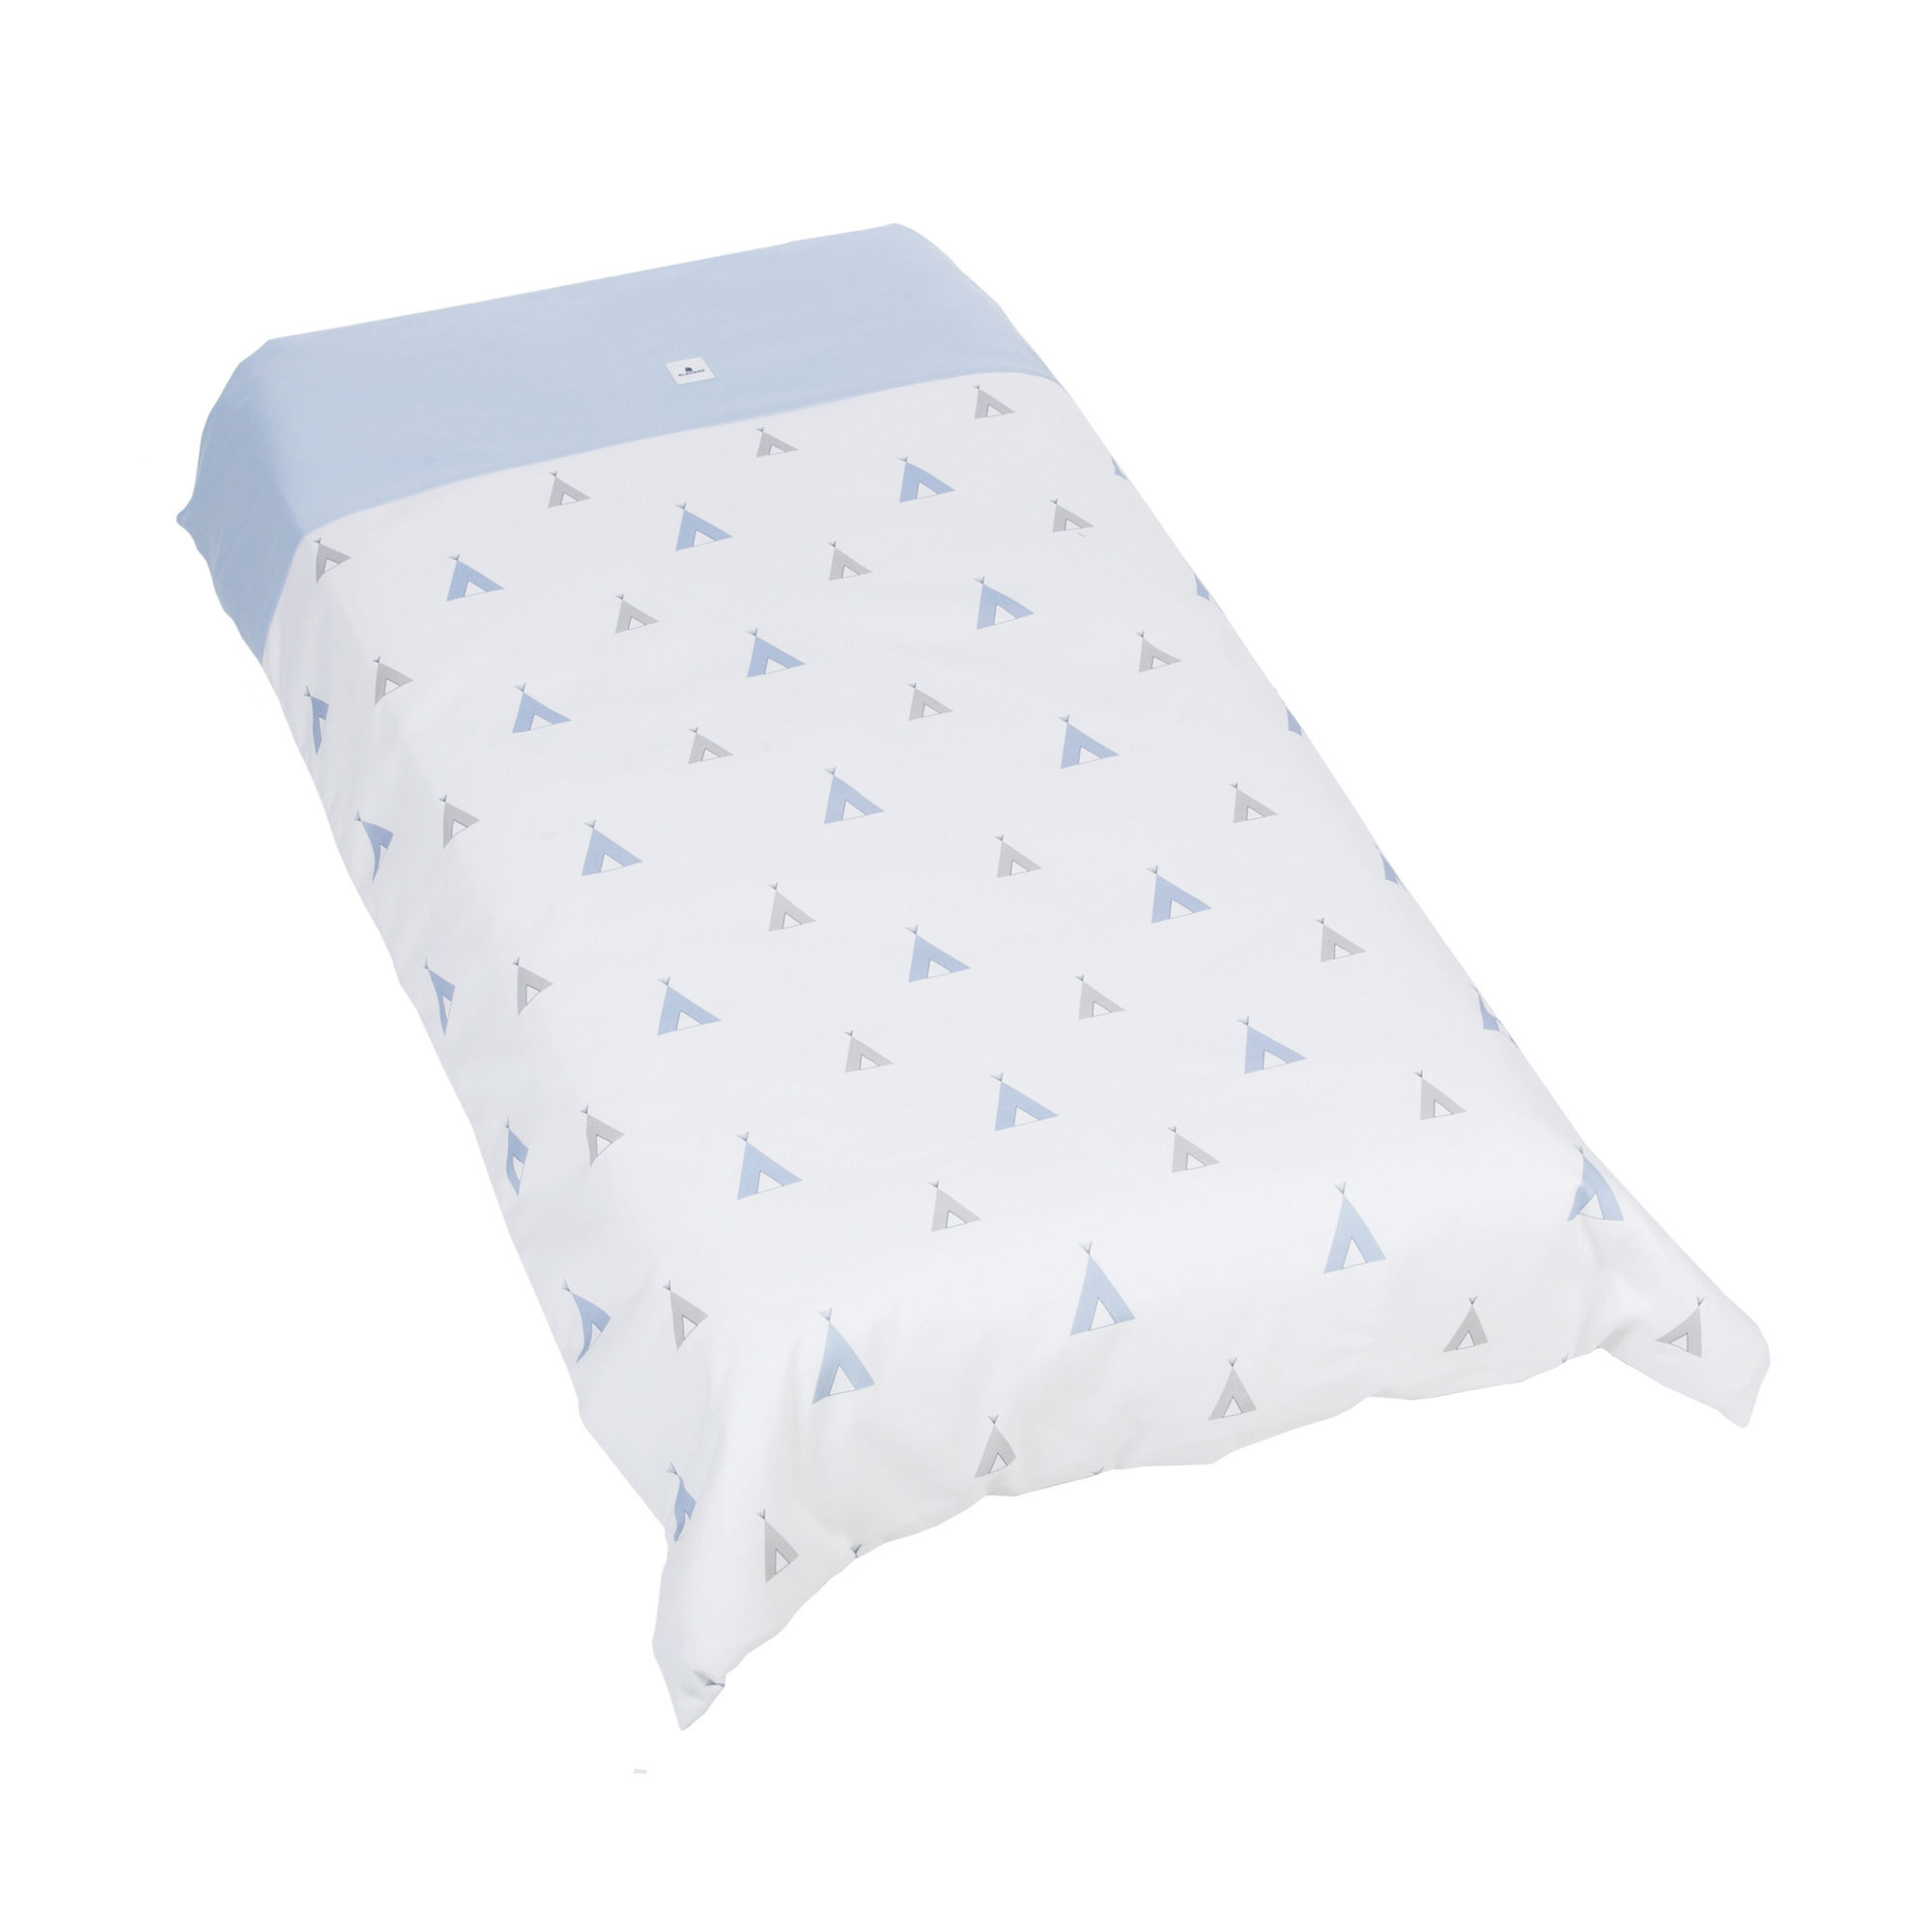 Cot duvet 60x120cm with removable filling